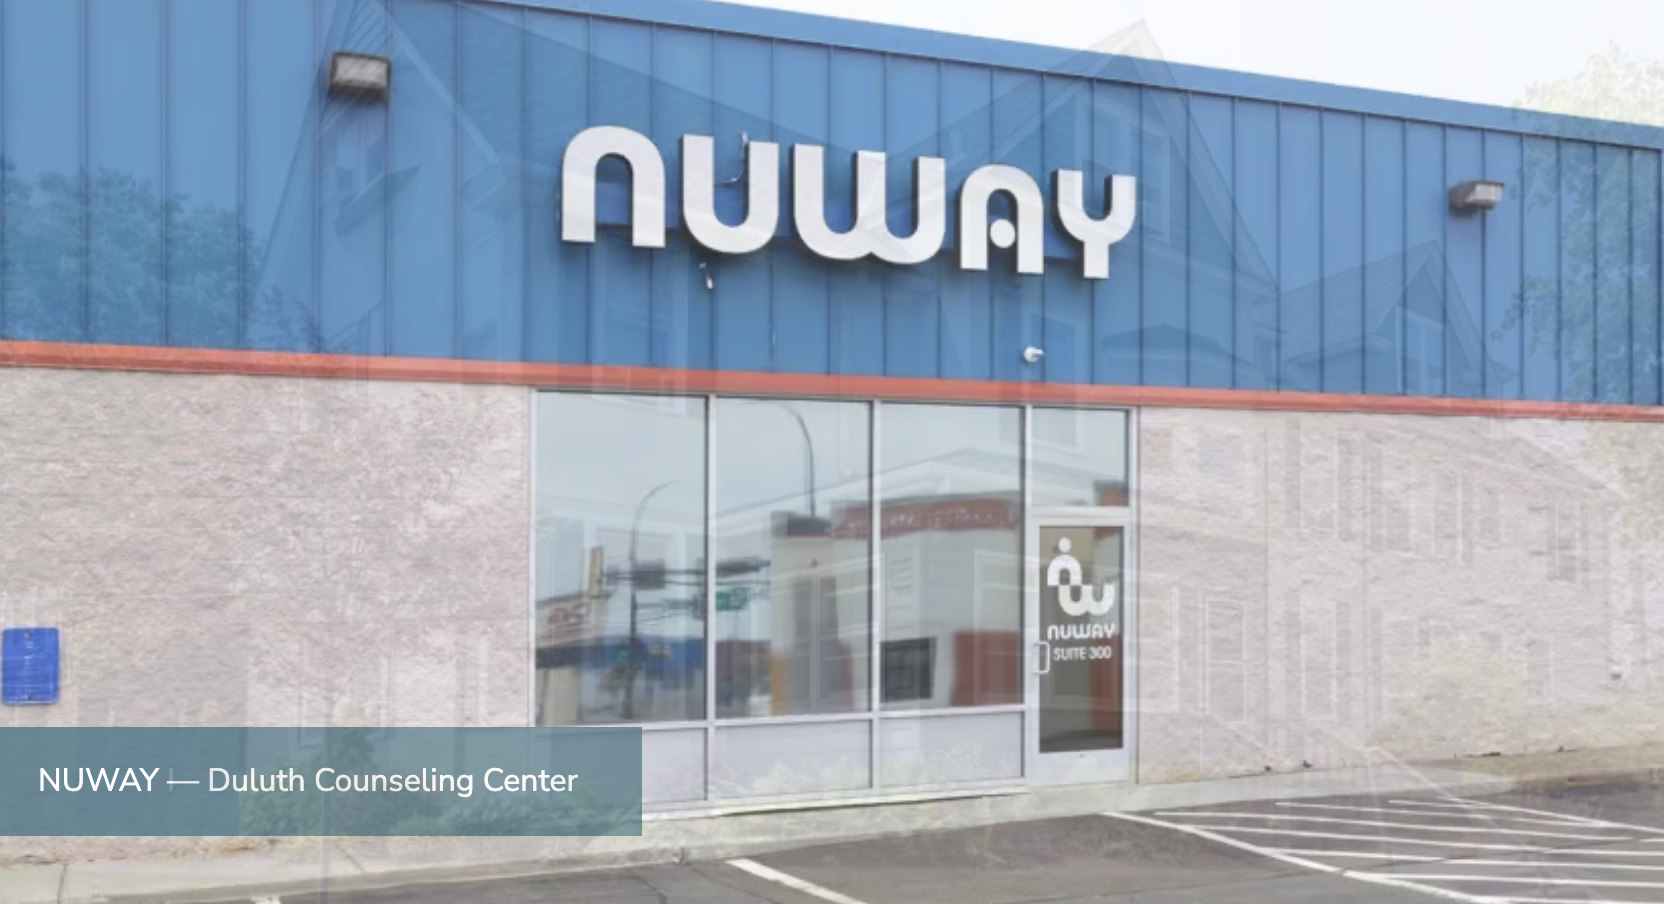 NUWAY Duluth Counseling Center